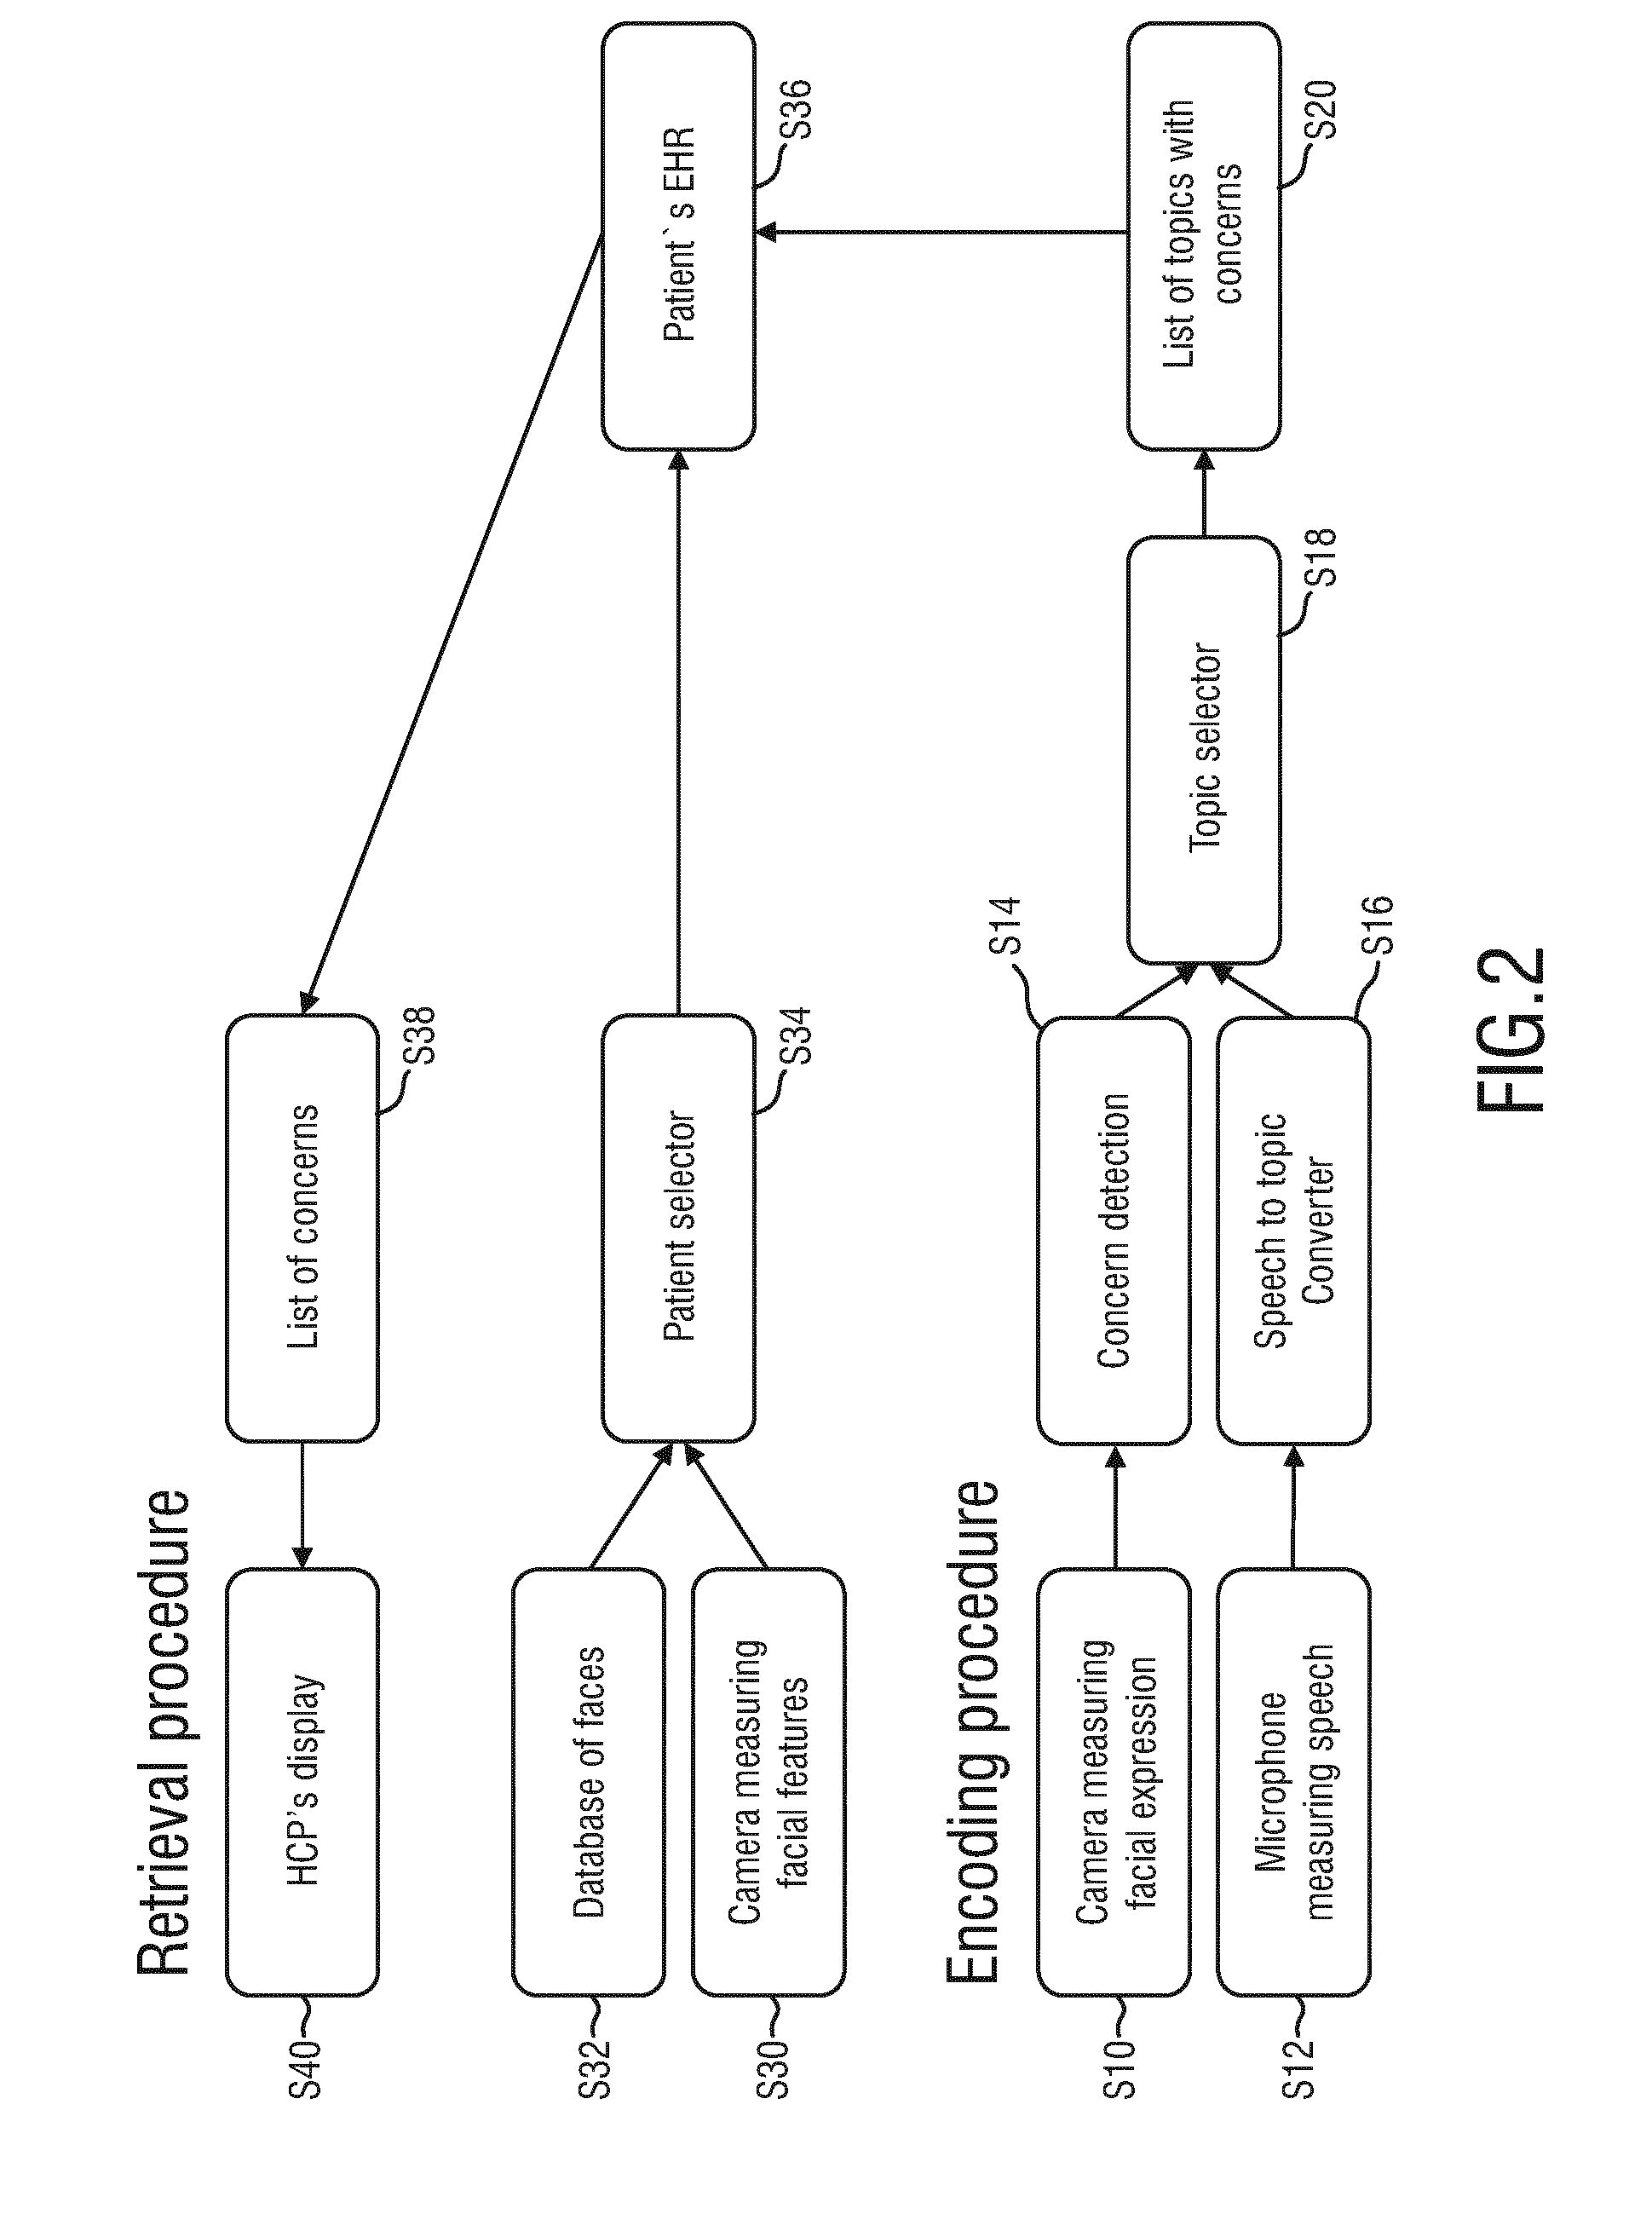 System and method for topic-related detection of the emotional state of a person